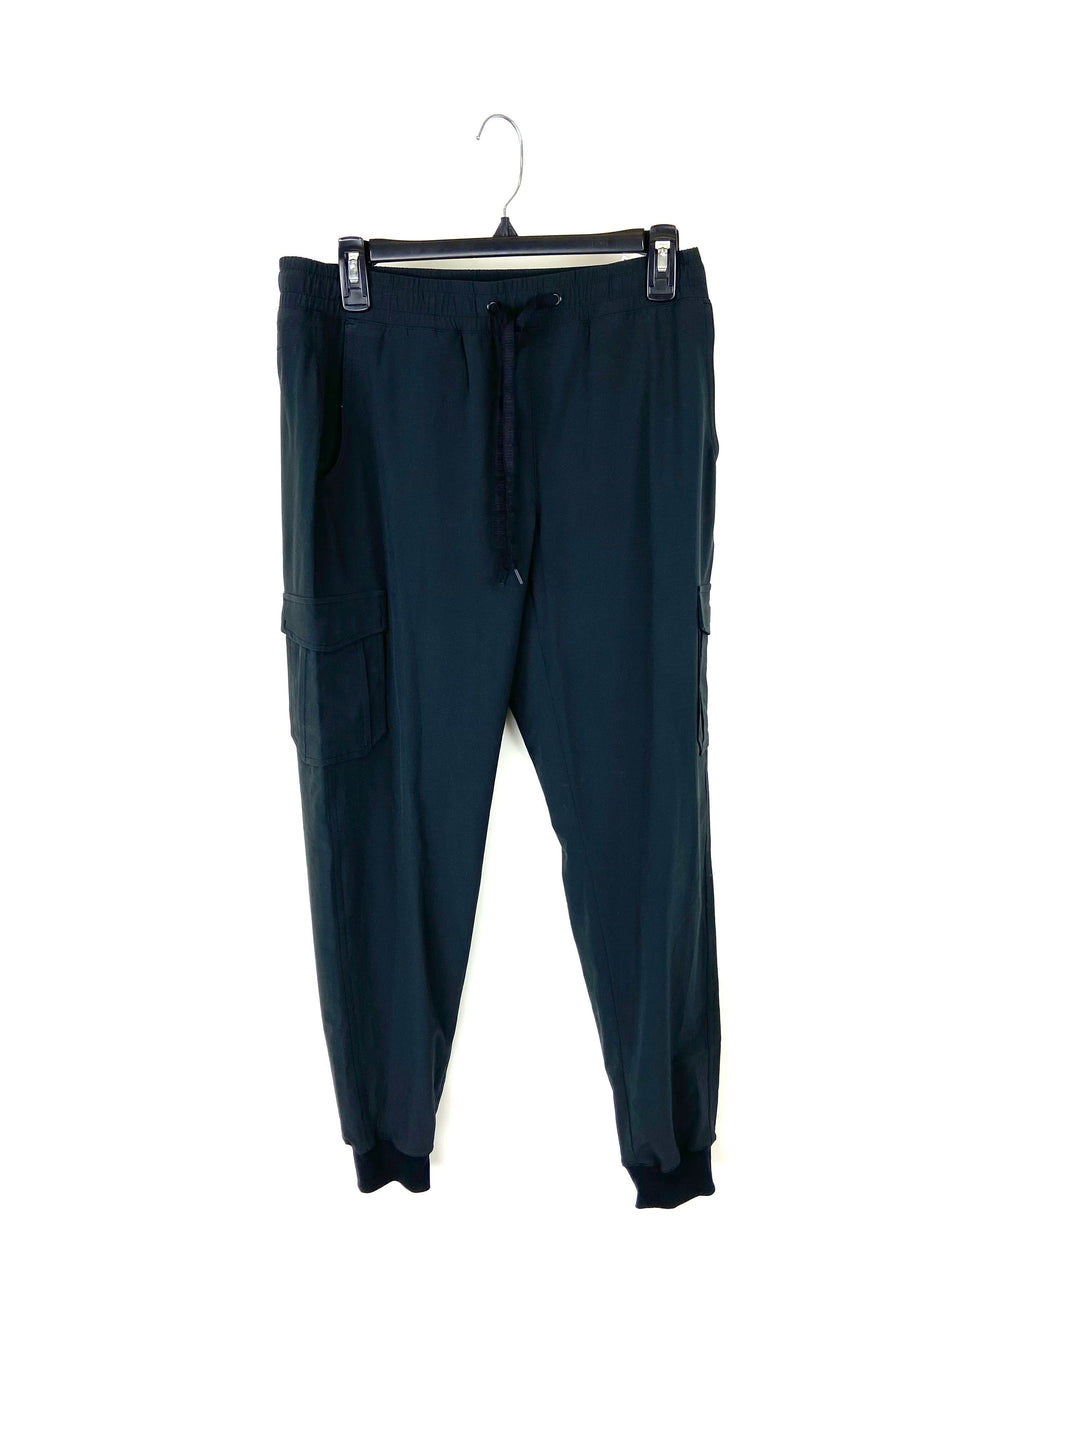 Outdoor Pant - Small